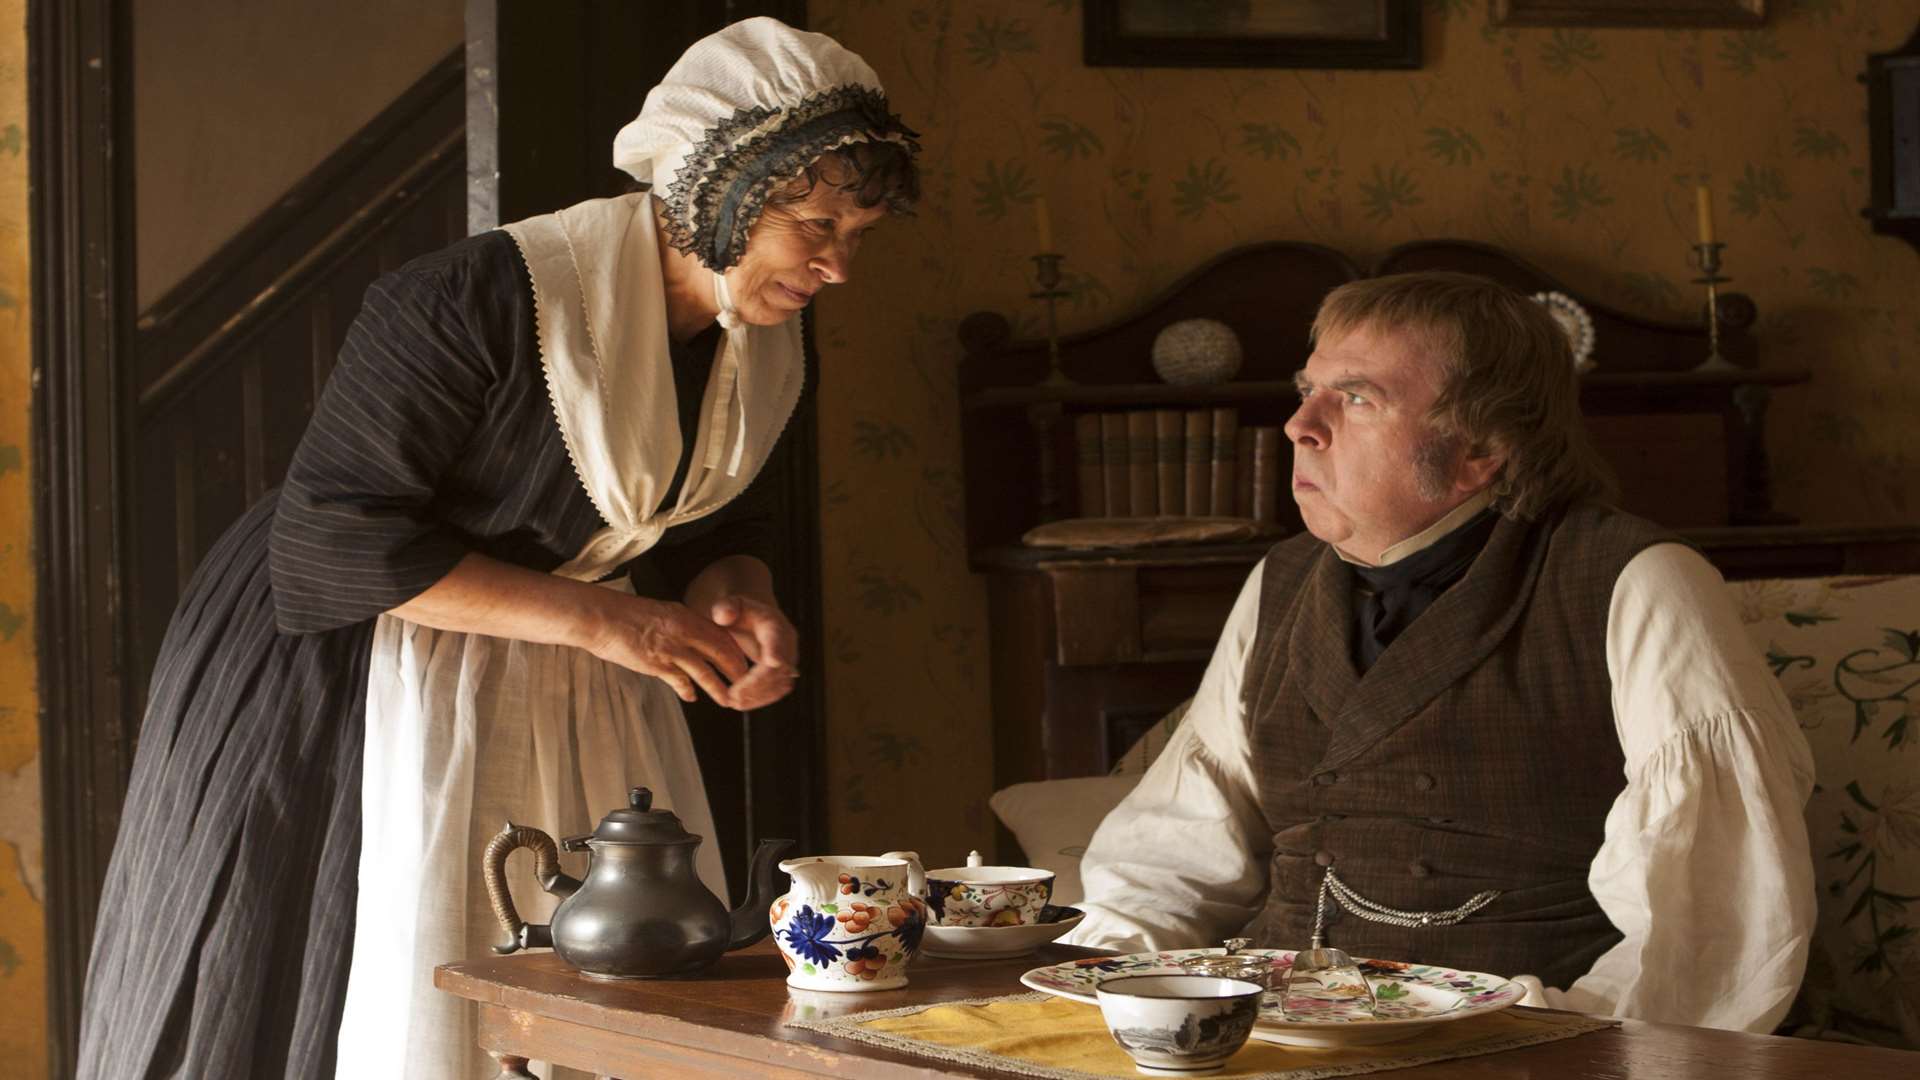 Timothy Spall as Joseph Mallord William Turner, in Mr. Turner. Picture: PA Photo/Handout/eOnefilms